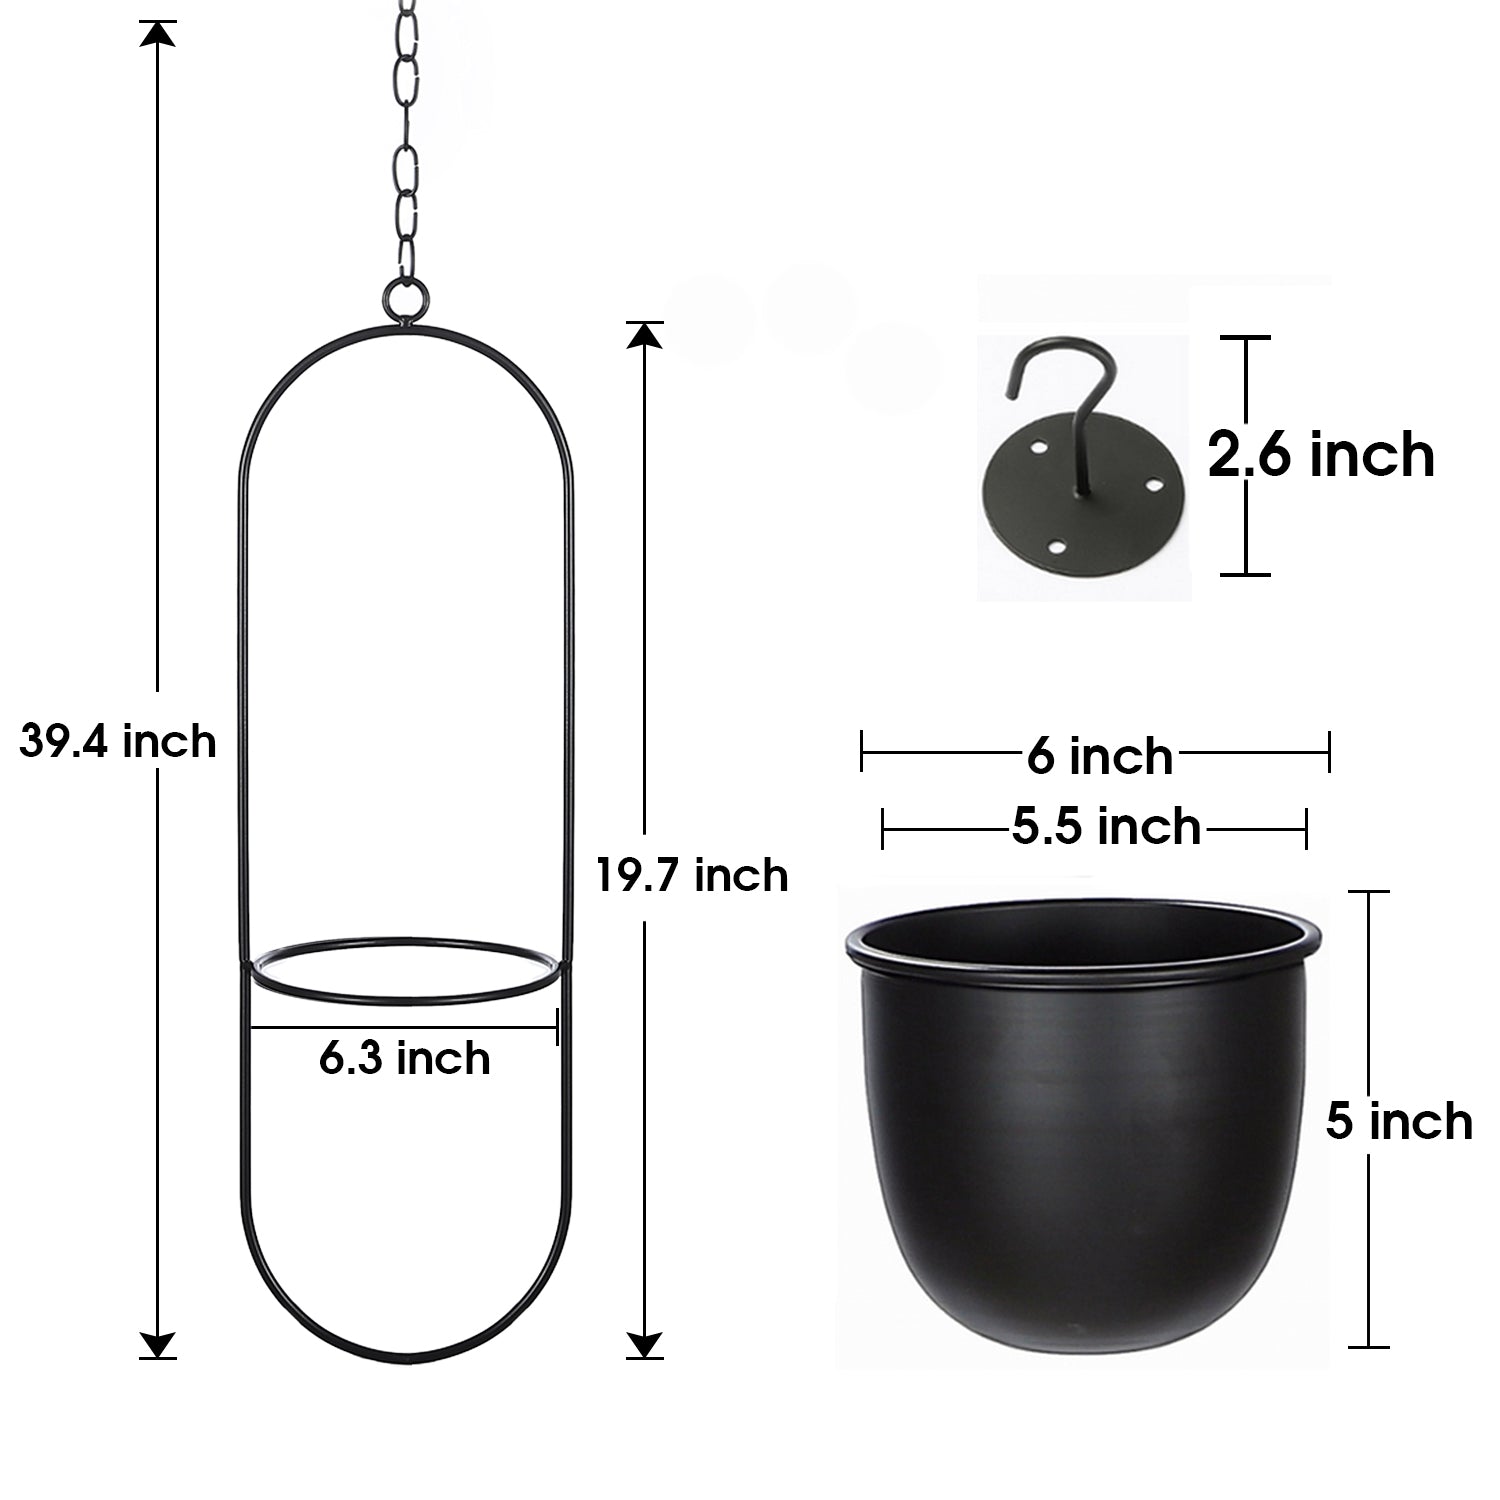 Buy Now Metal Minimalist Hanging Planters with 6 inch Pot Online